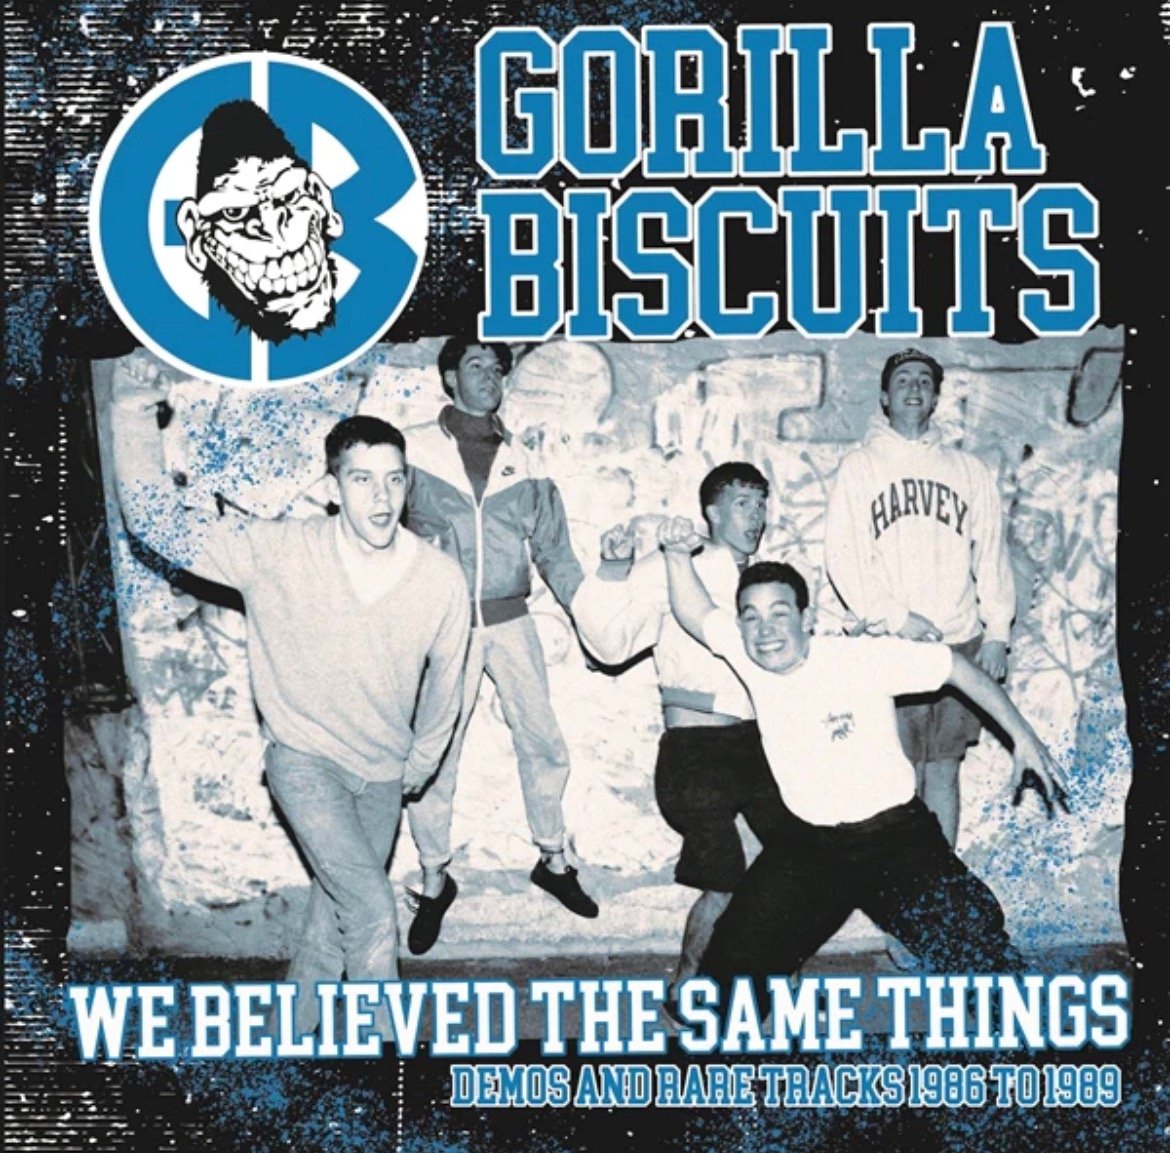 Image of Gorilla Biscuits - "We Believed the Same Things: Demos and Rare Tracks 1986 to 1989” LP